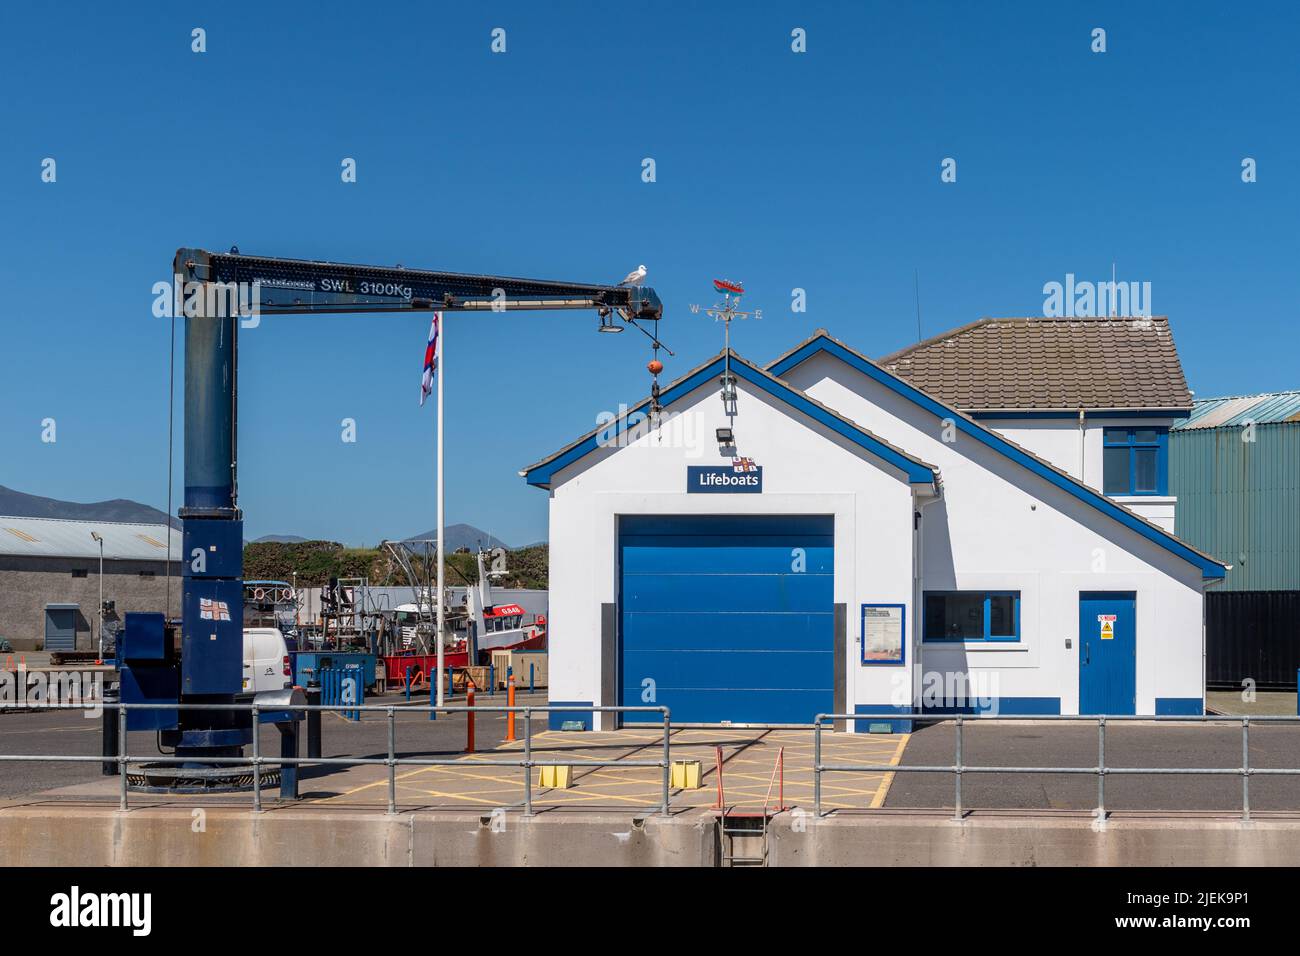 RNLI Lifeboat Station in Kilkeel Harbour, County Down, Northern Ireland, UK. Stock Photo